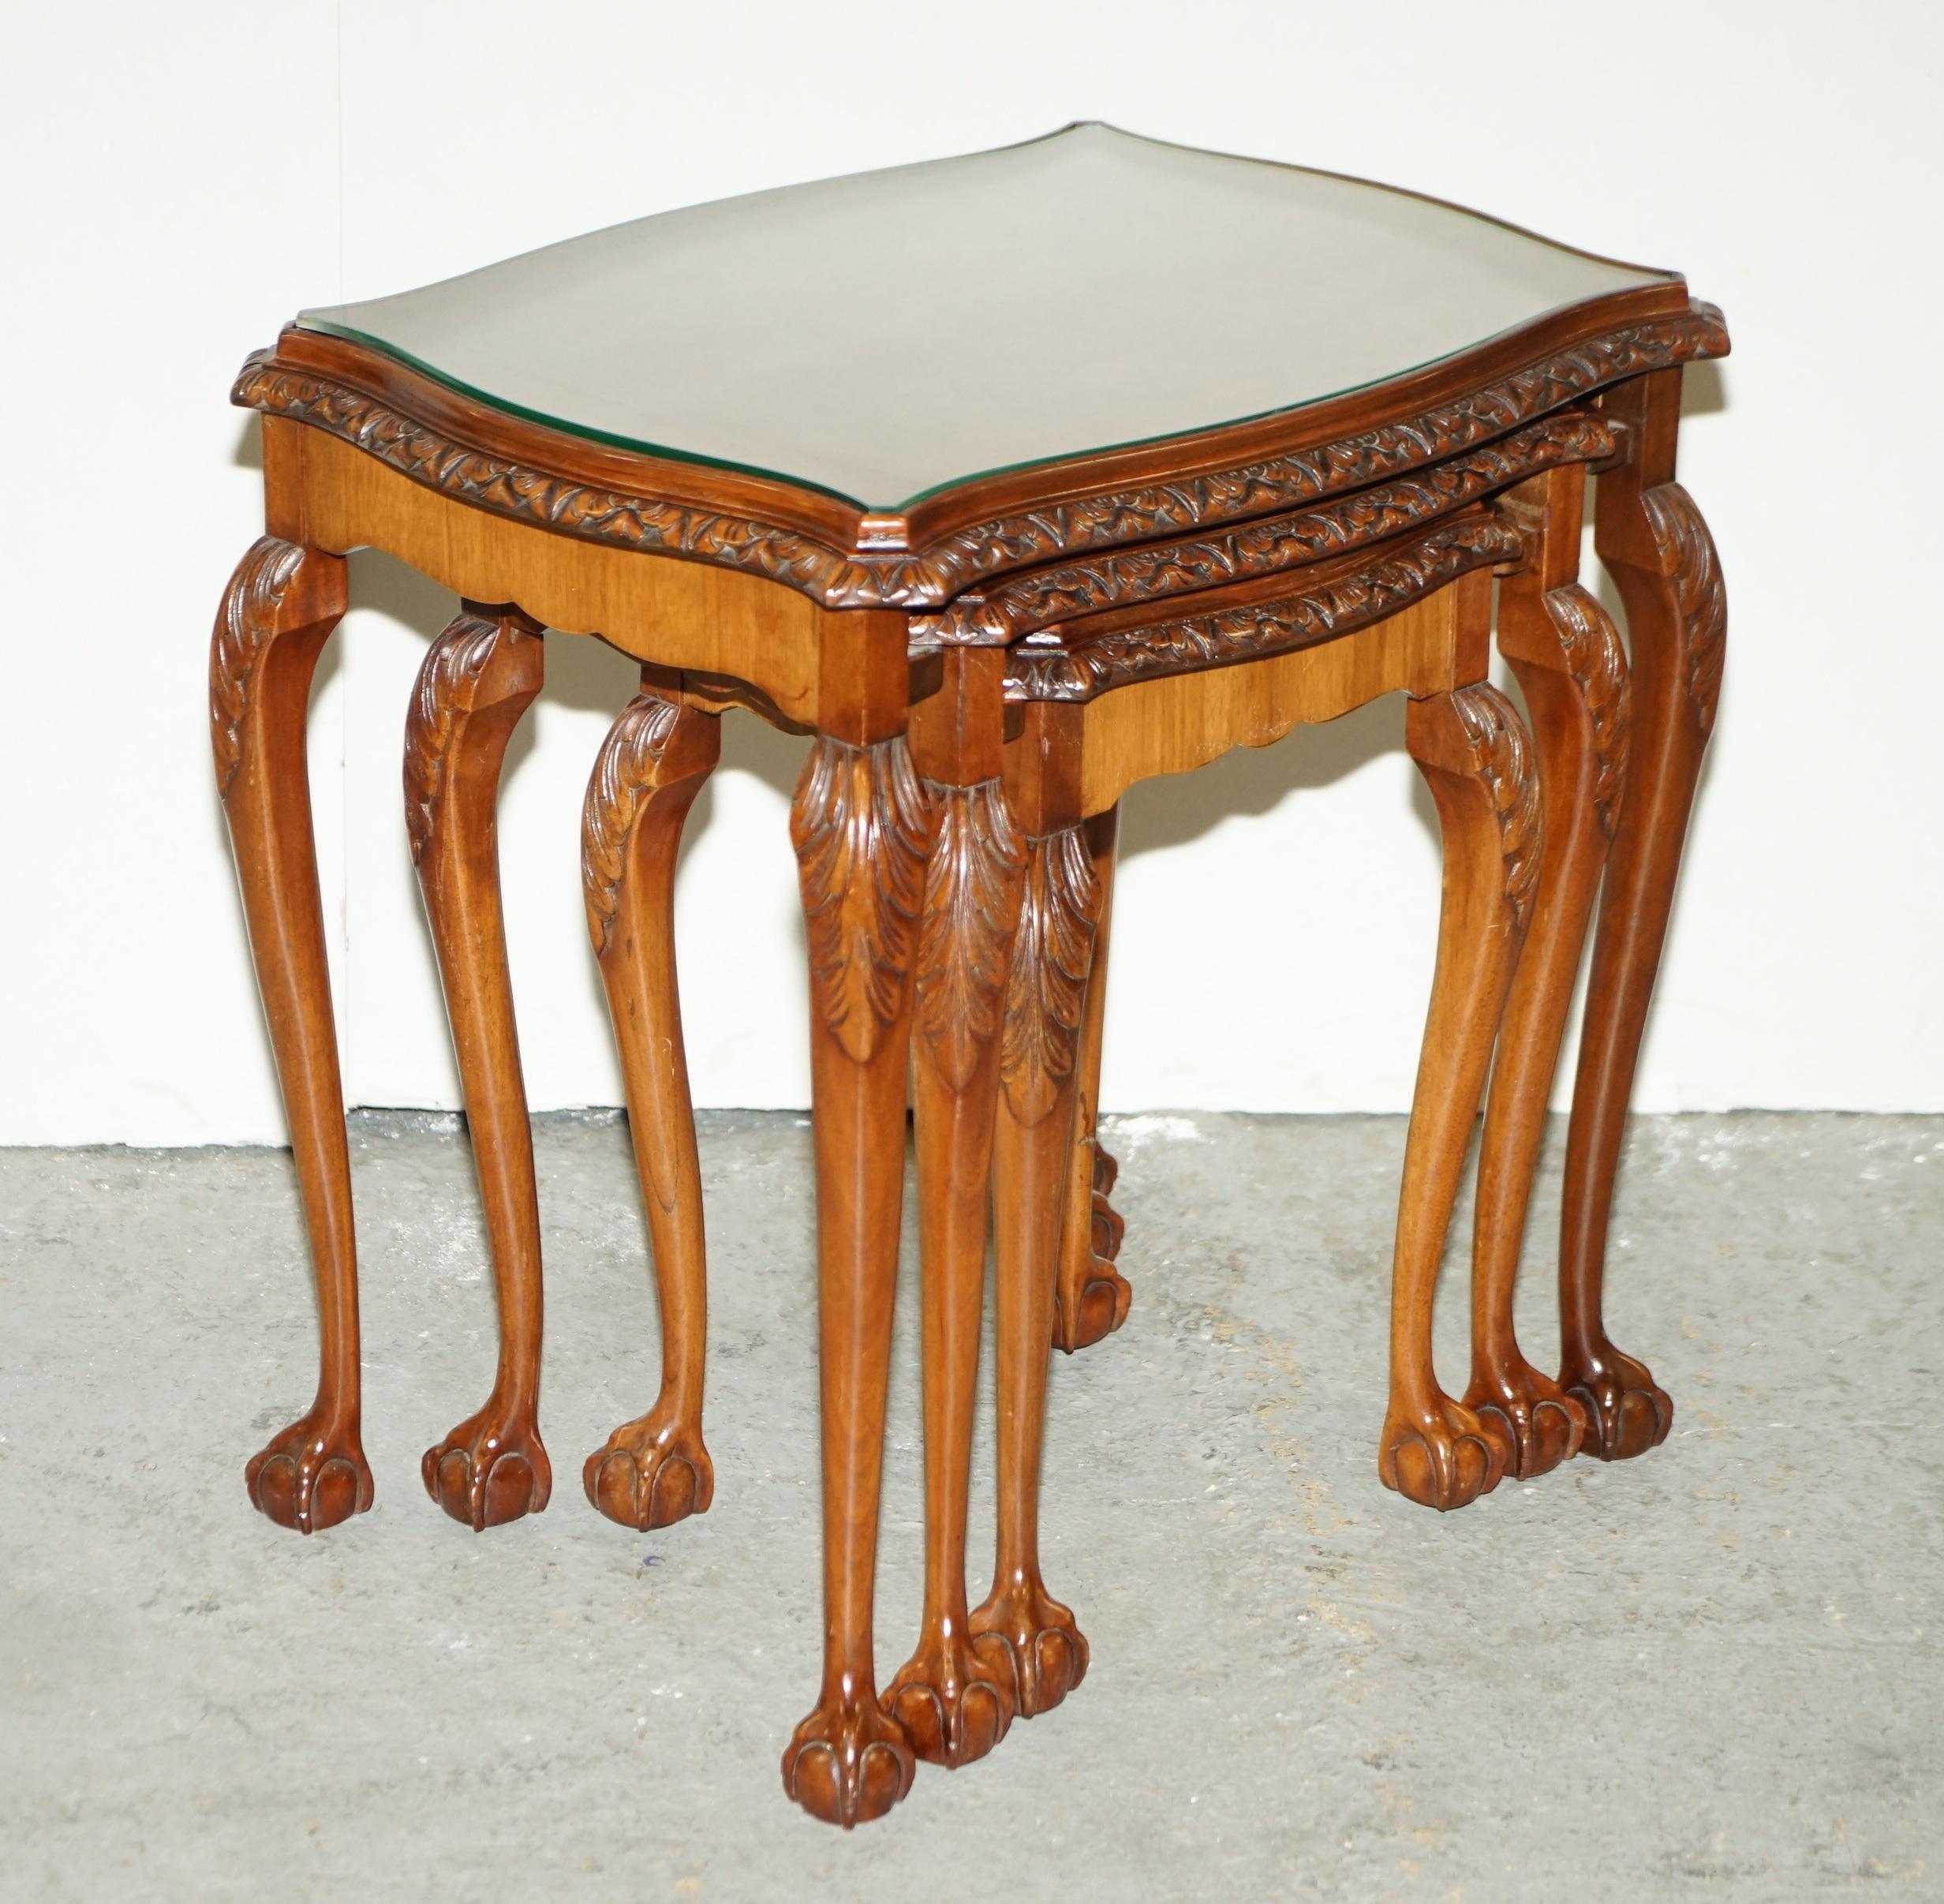 Here we have for sale a lovely burr walnut serpentine nest of 3 stacking tables with glass tops standing on claw and ball feet and heavily carved detailing.

Overall, the tables are in very good condition they have been cleaned and polished ready